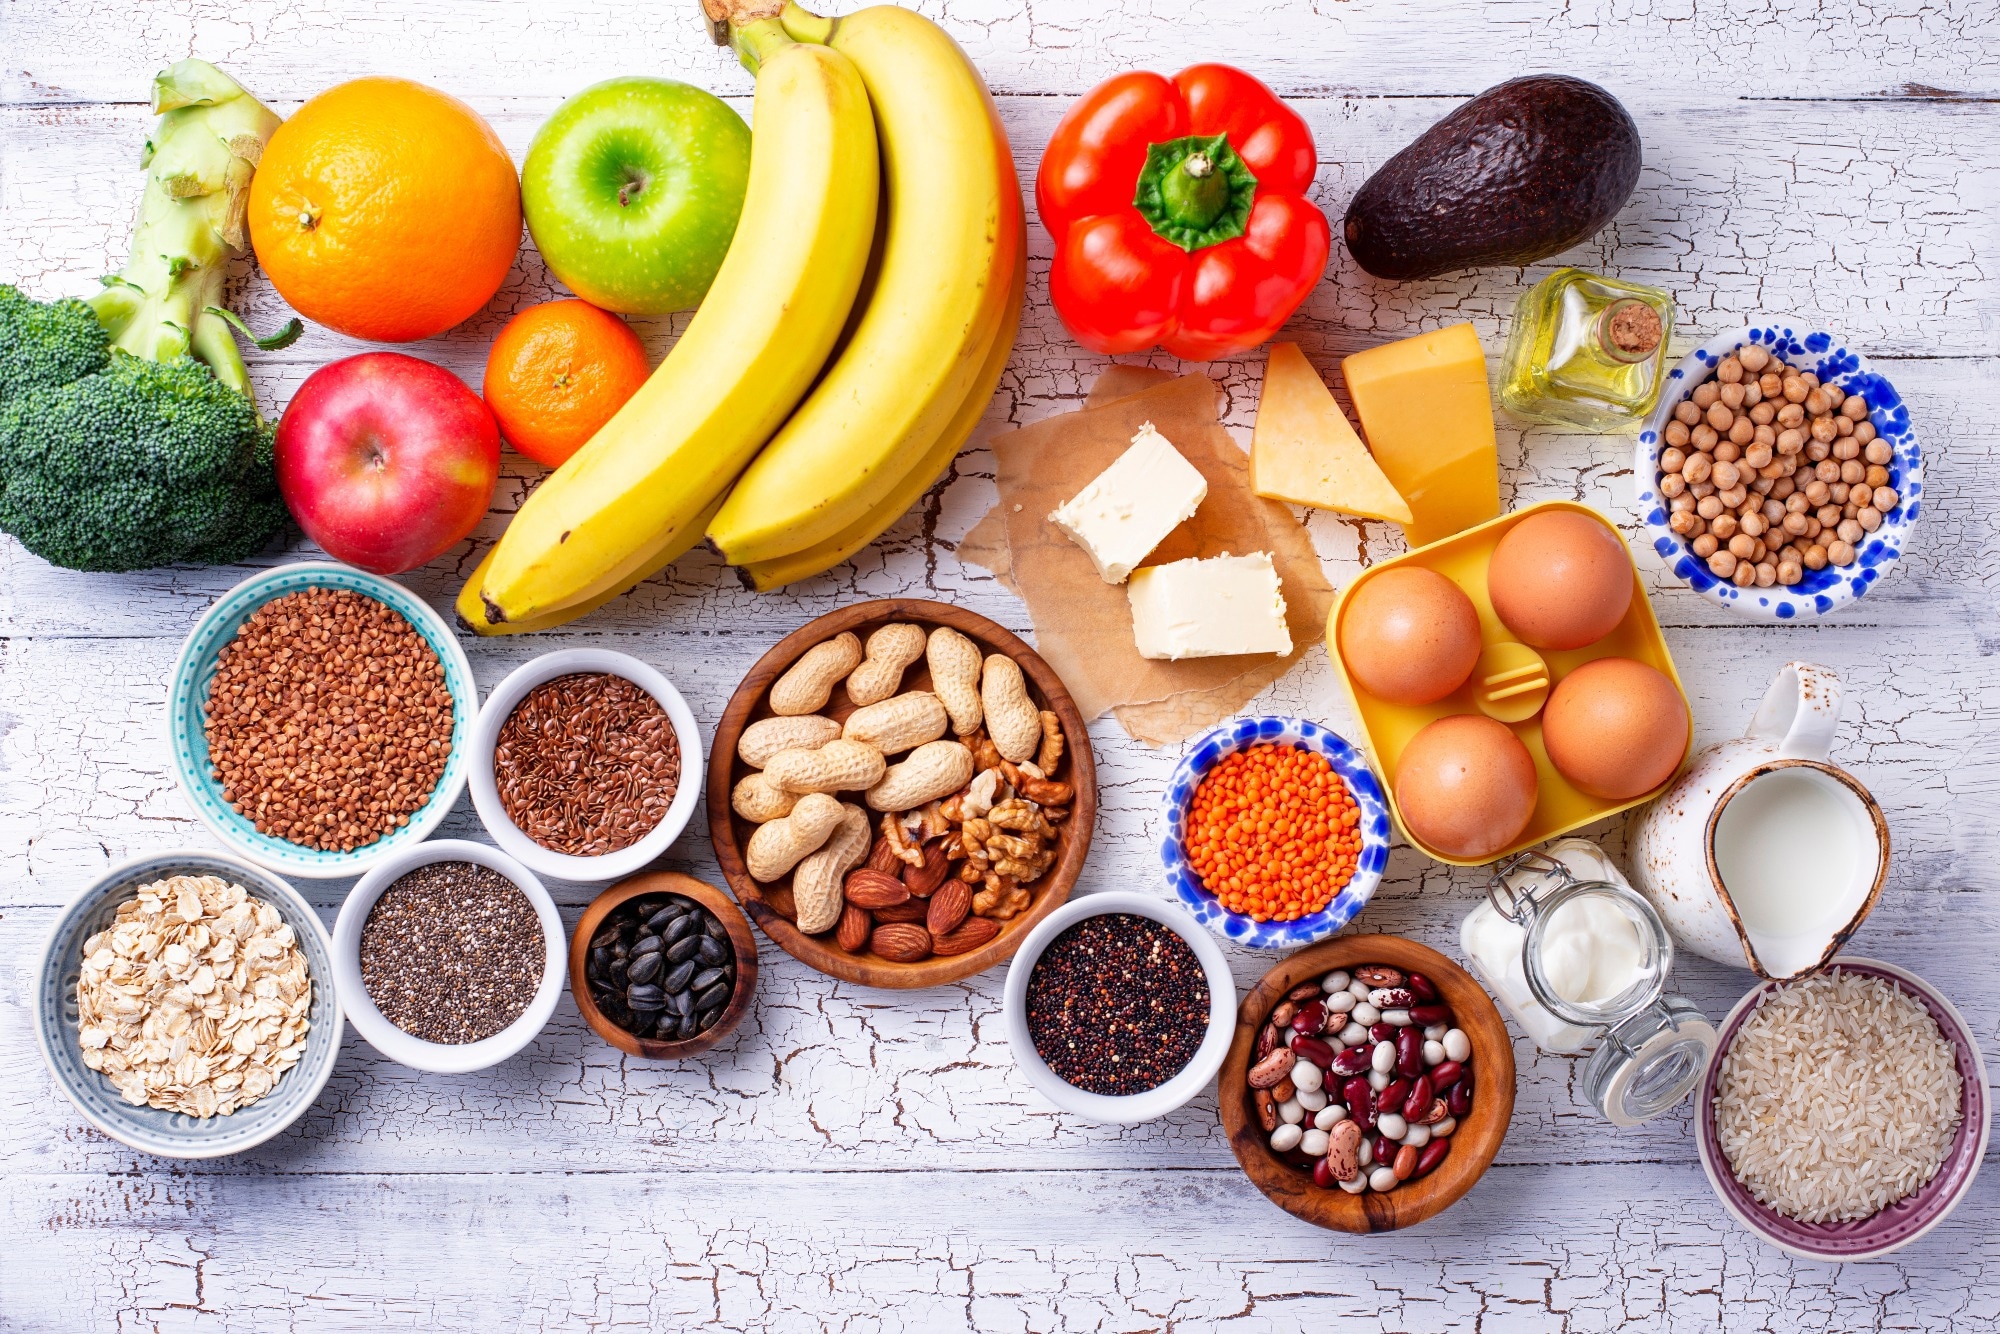 Study: Vegetarian diets and risk of all-cause mortality in a population-based prospective study in the United States. Image Credit: Yulia Furman / Shutterstock.com